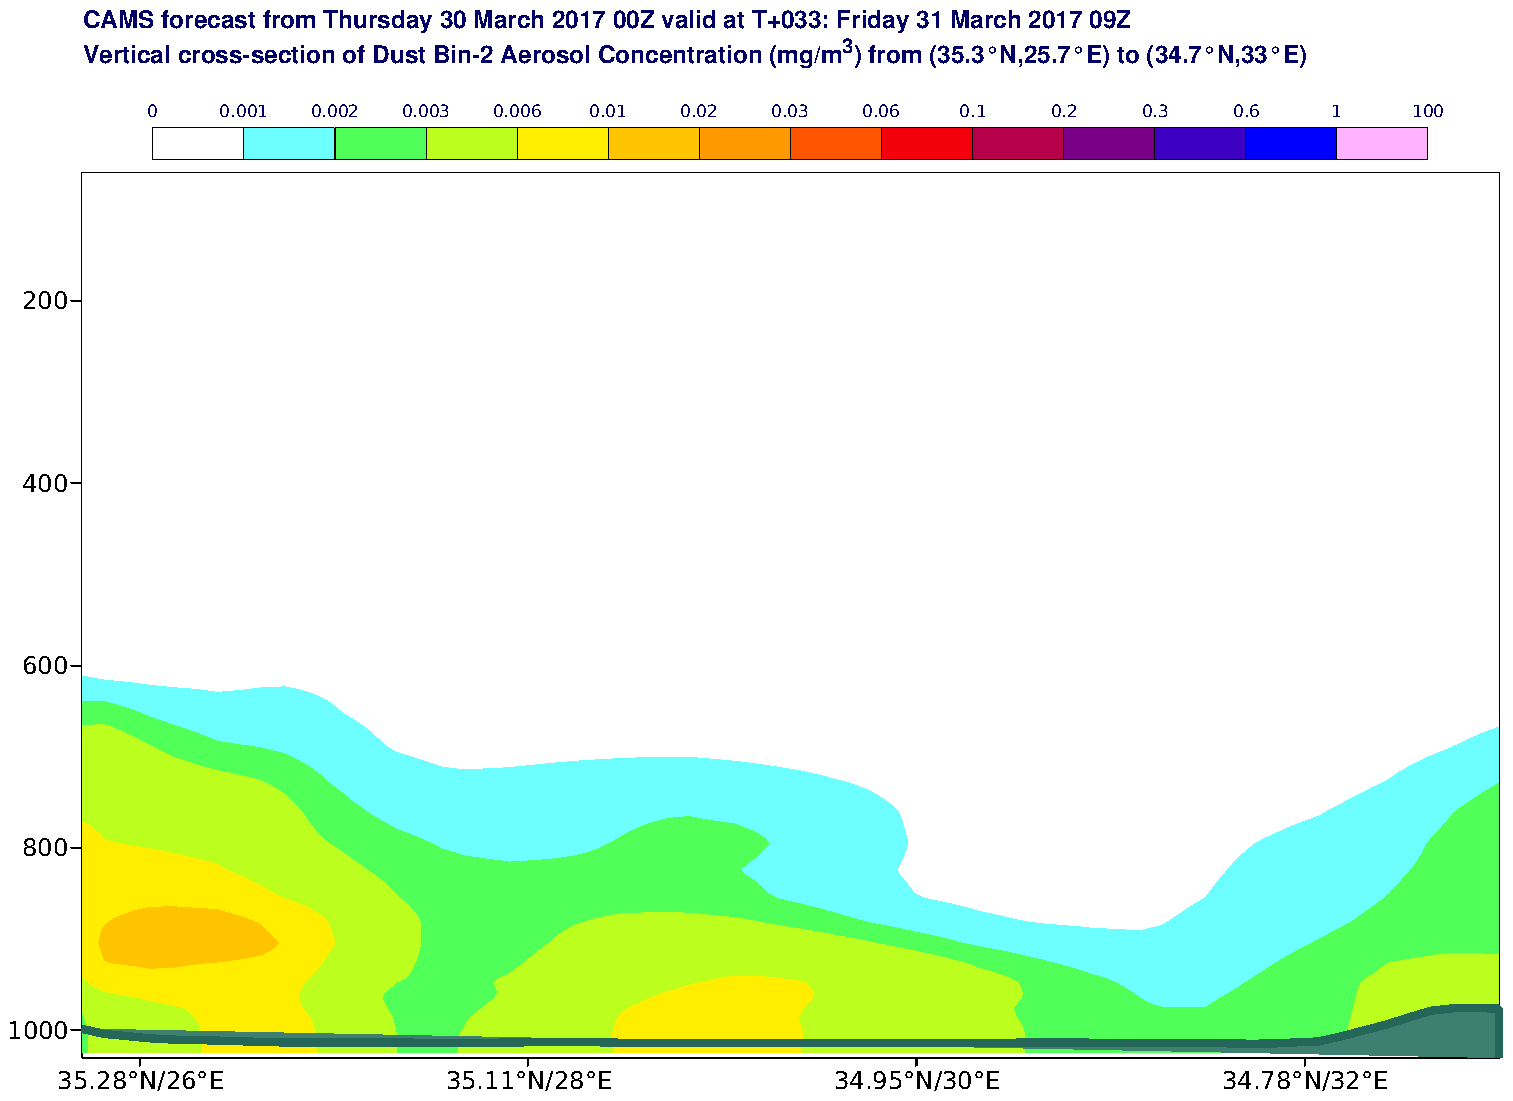 Vertical cross-section of Dust Bin-2 Aerosol Concentration (mg/m3) valid at T33 - 2017-03-31 09:00